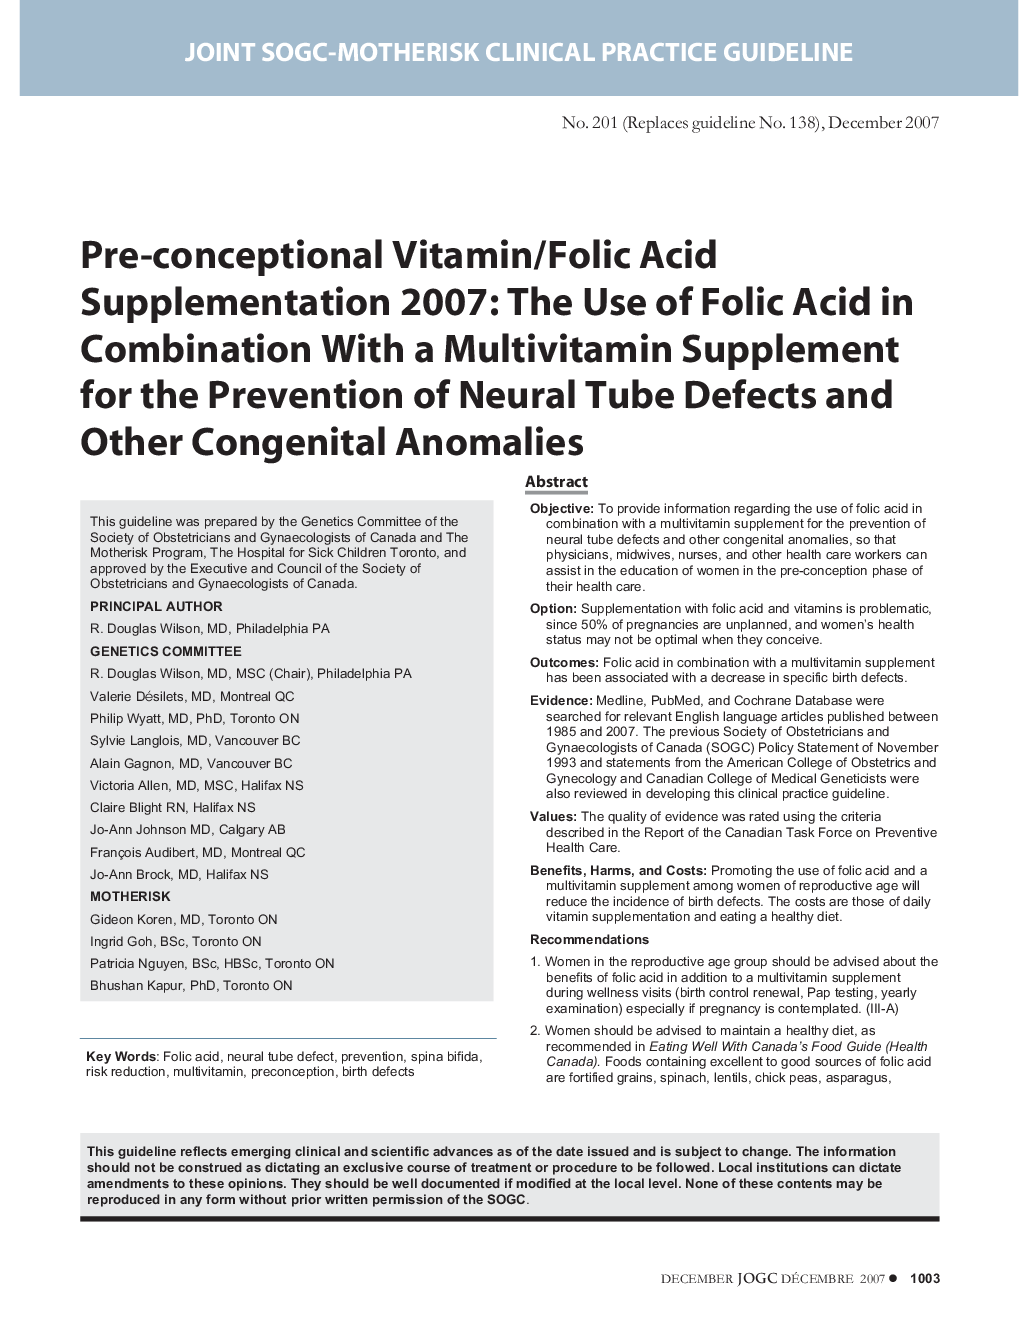 Pre-conceptional Vitamin/Folic Acid Supplementation 2007: The Use of Folic Acid in Combination With a Multivitamin Supplement for the Prevention of Neural Tube Defects and Other Congenital Anomalies